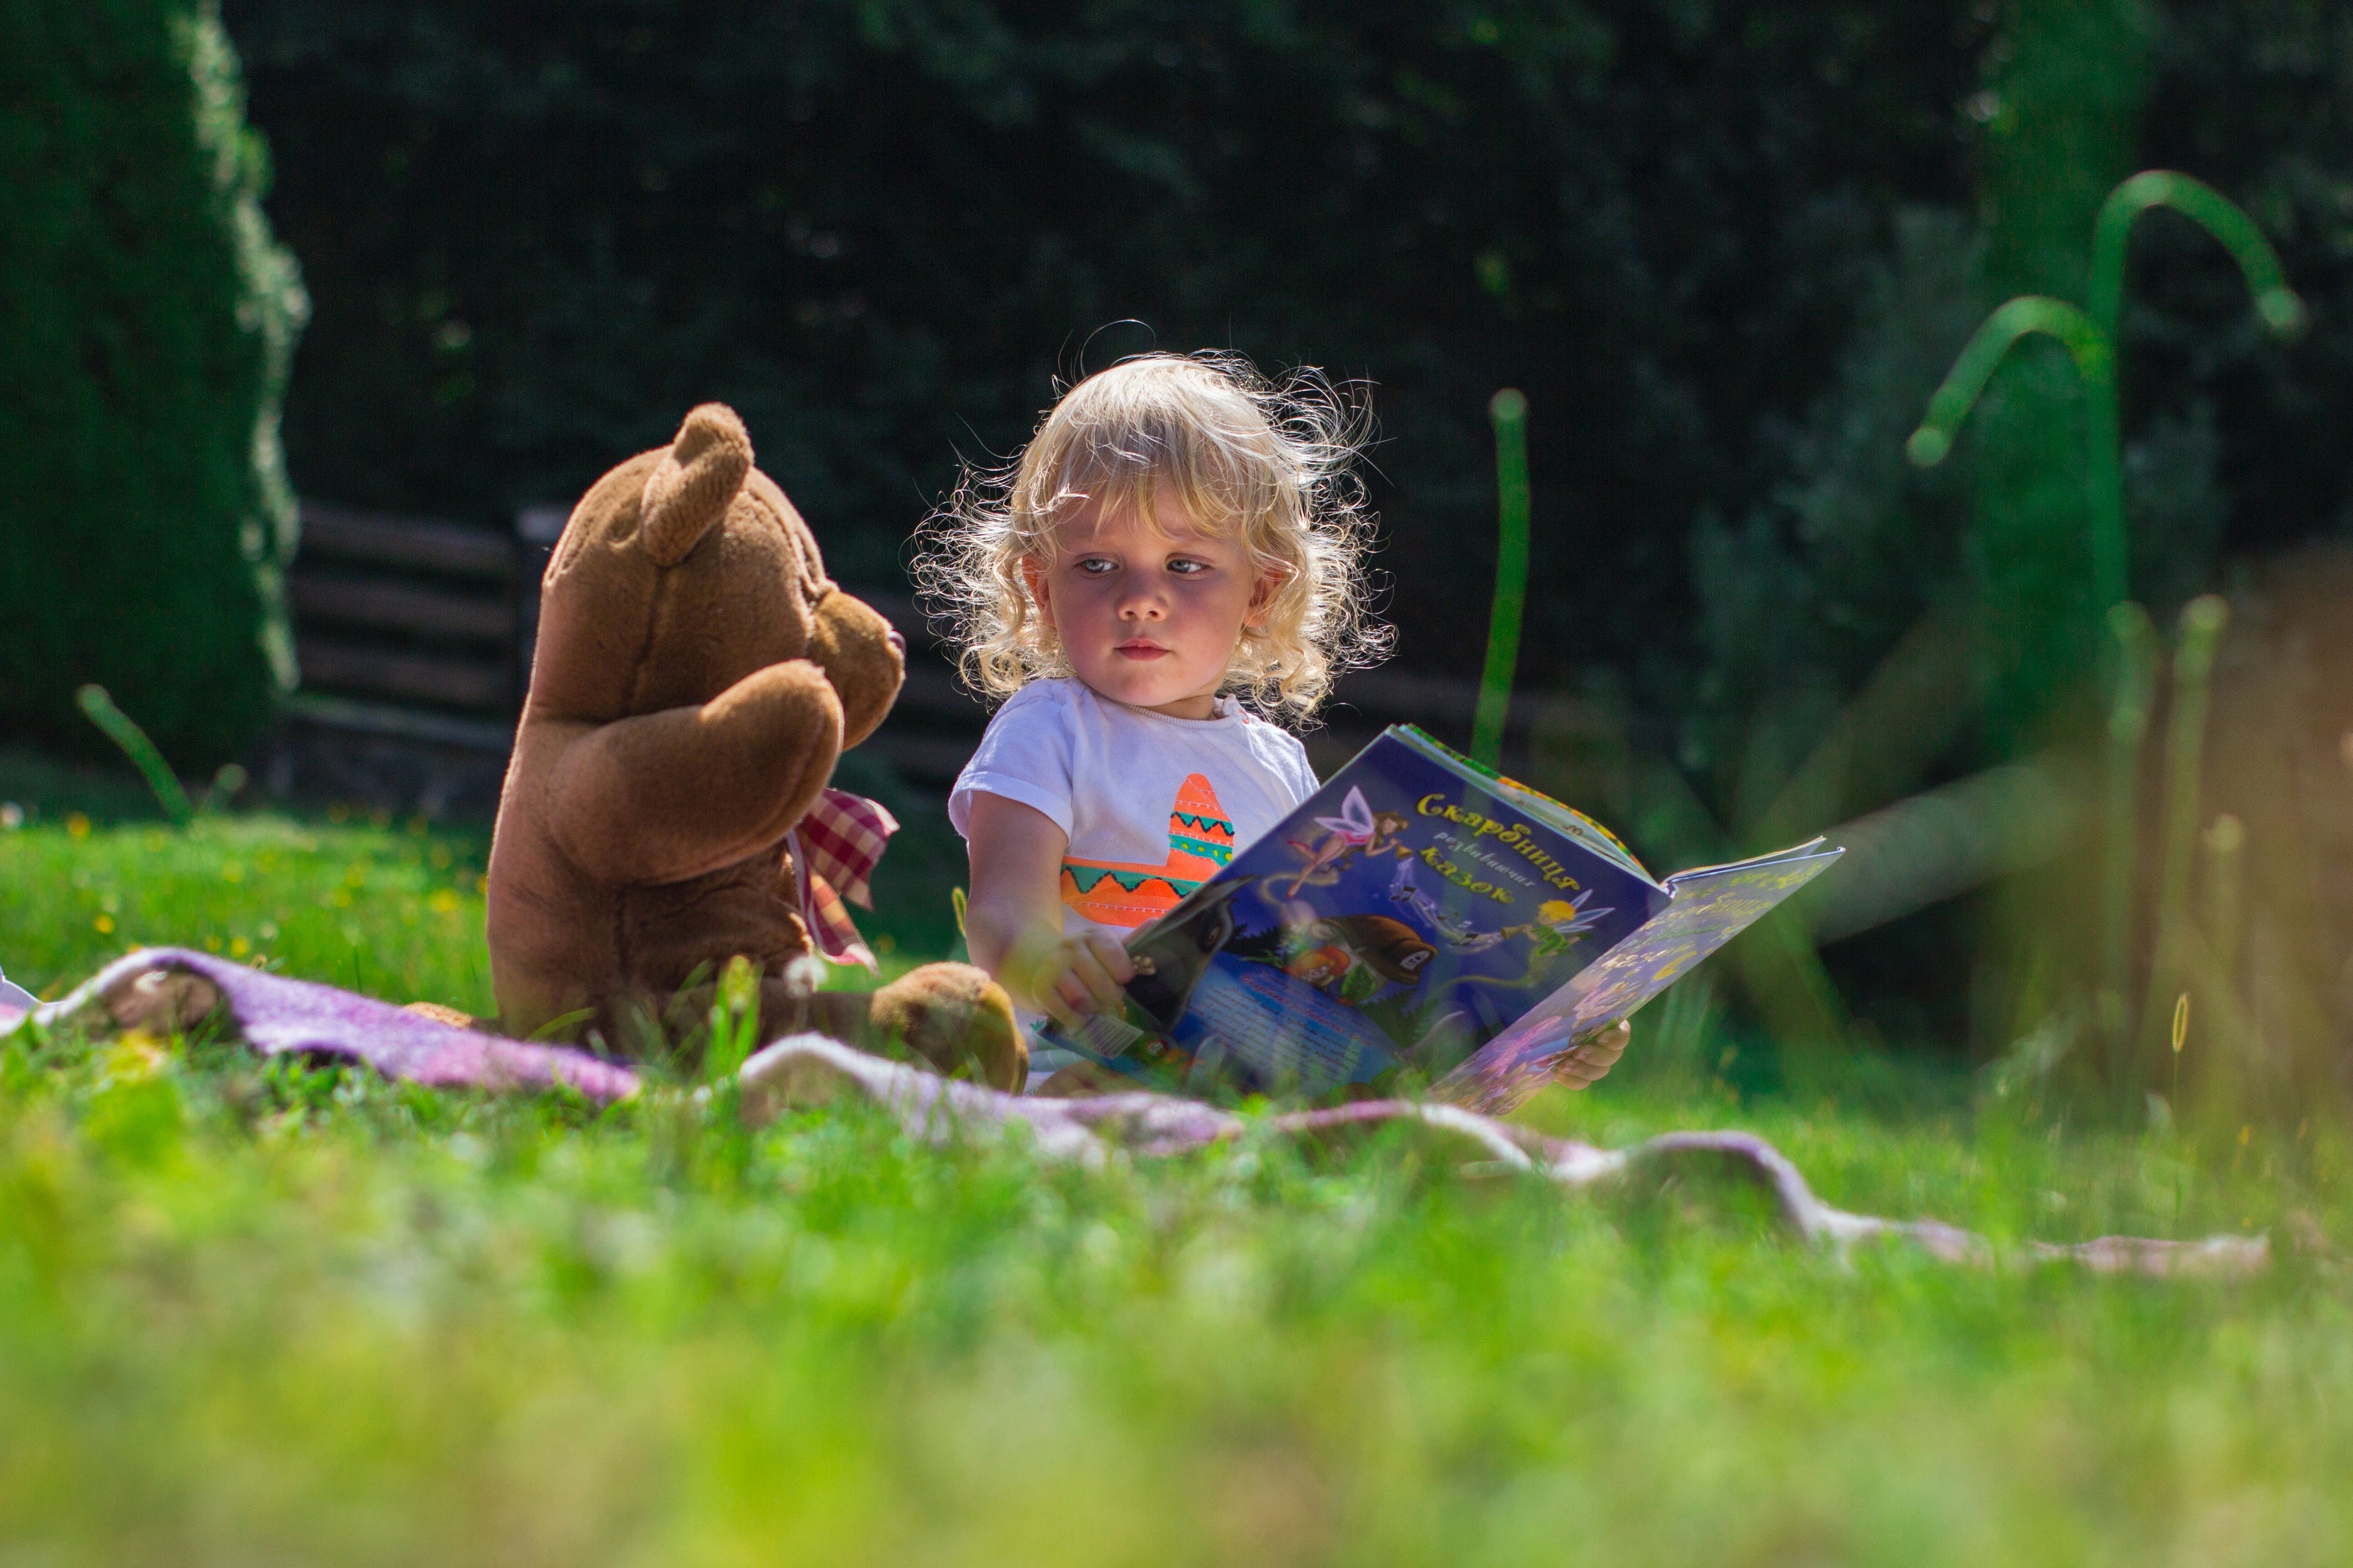 Small child on a lawn with a teddy bear, reading a book.